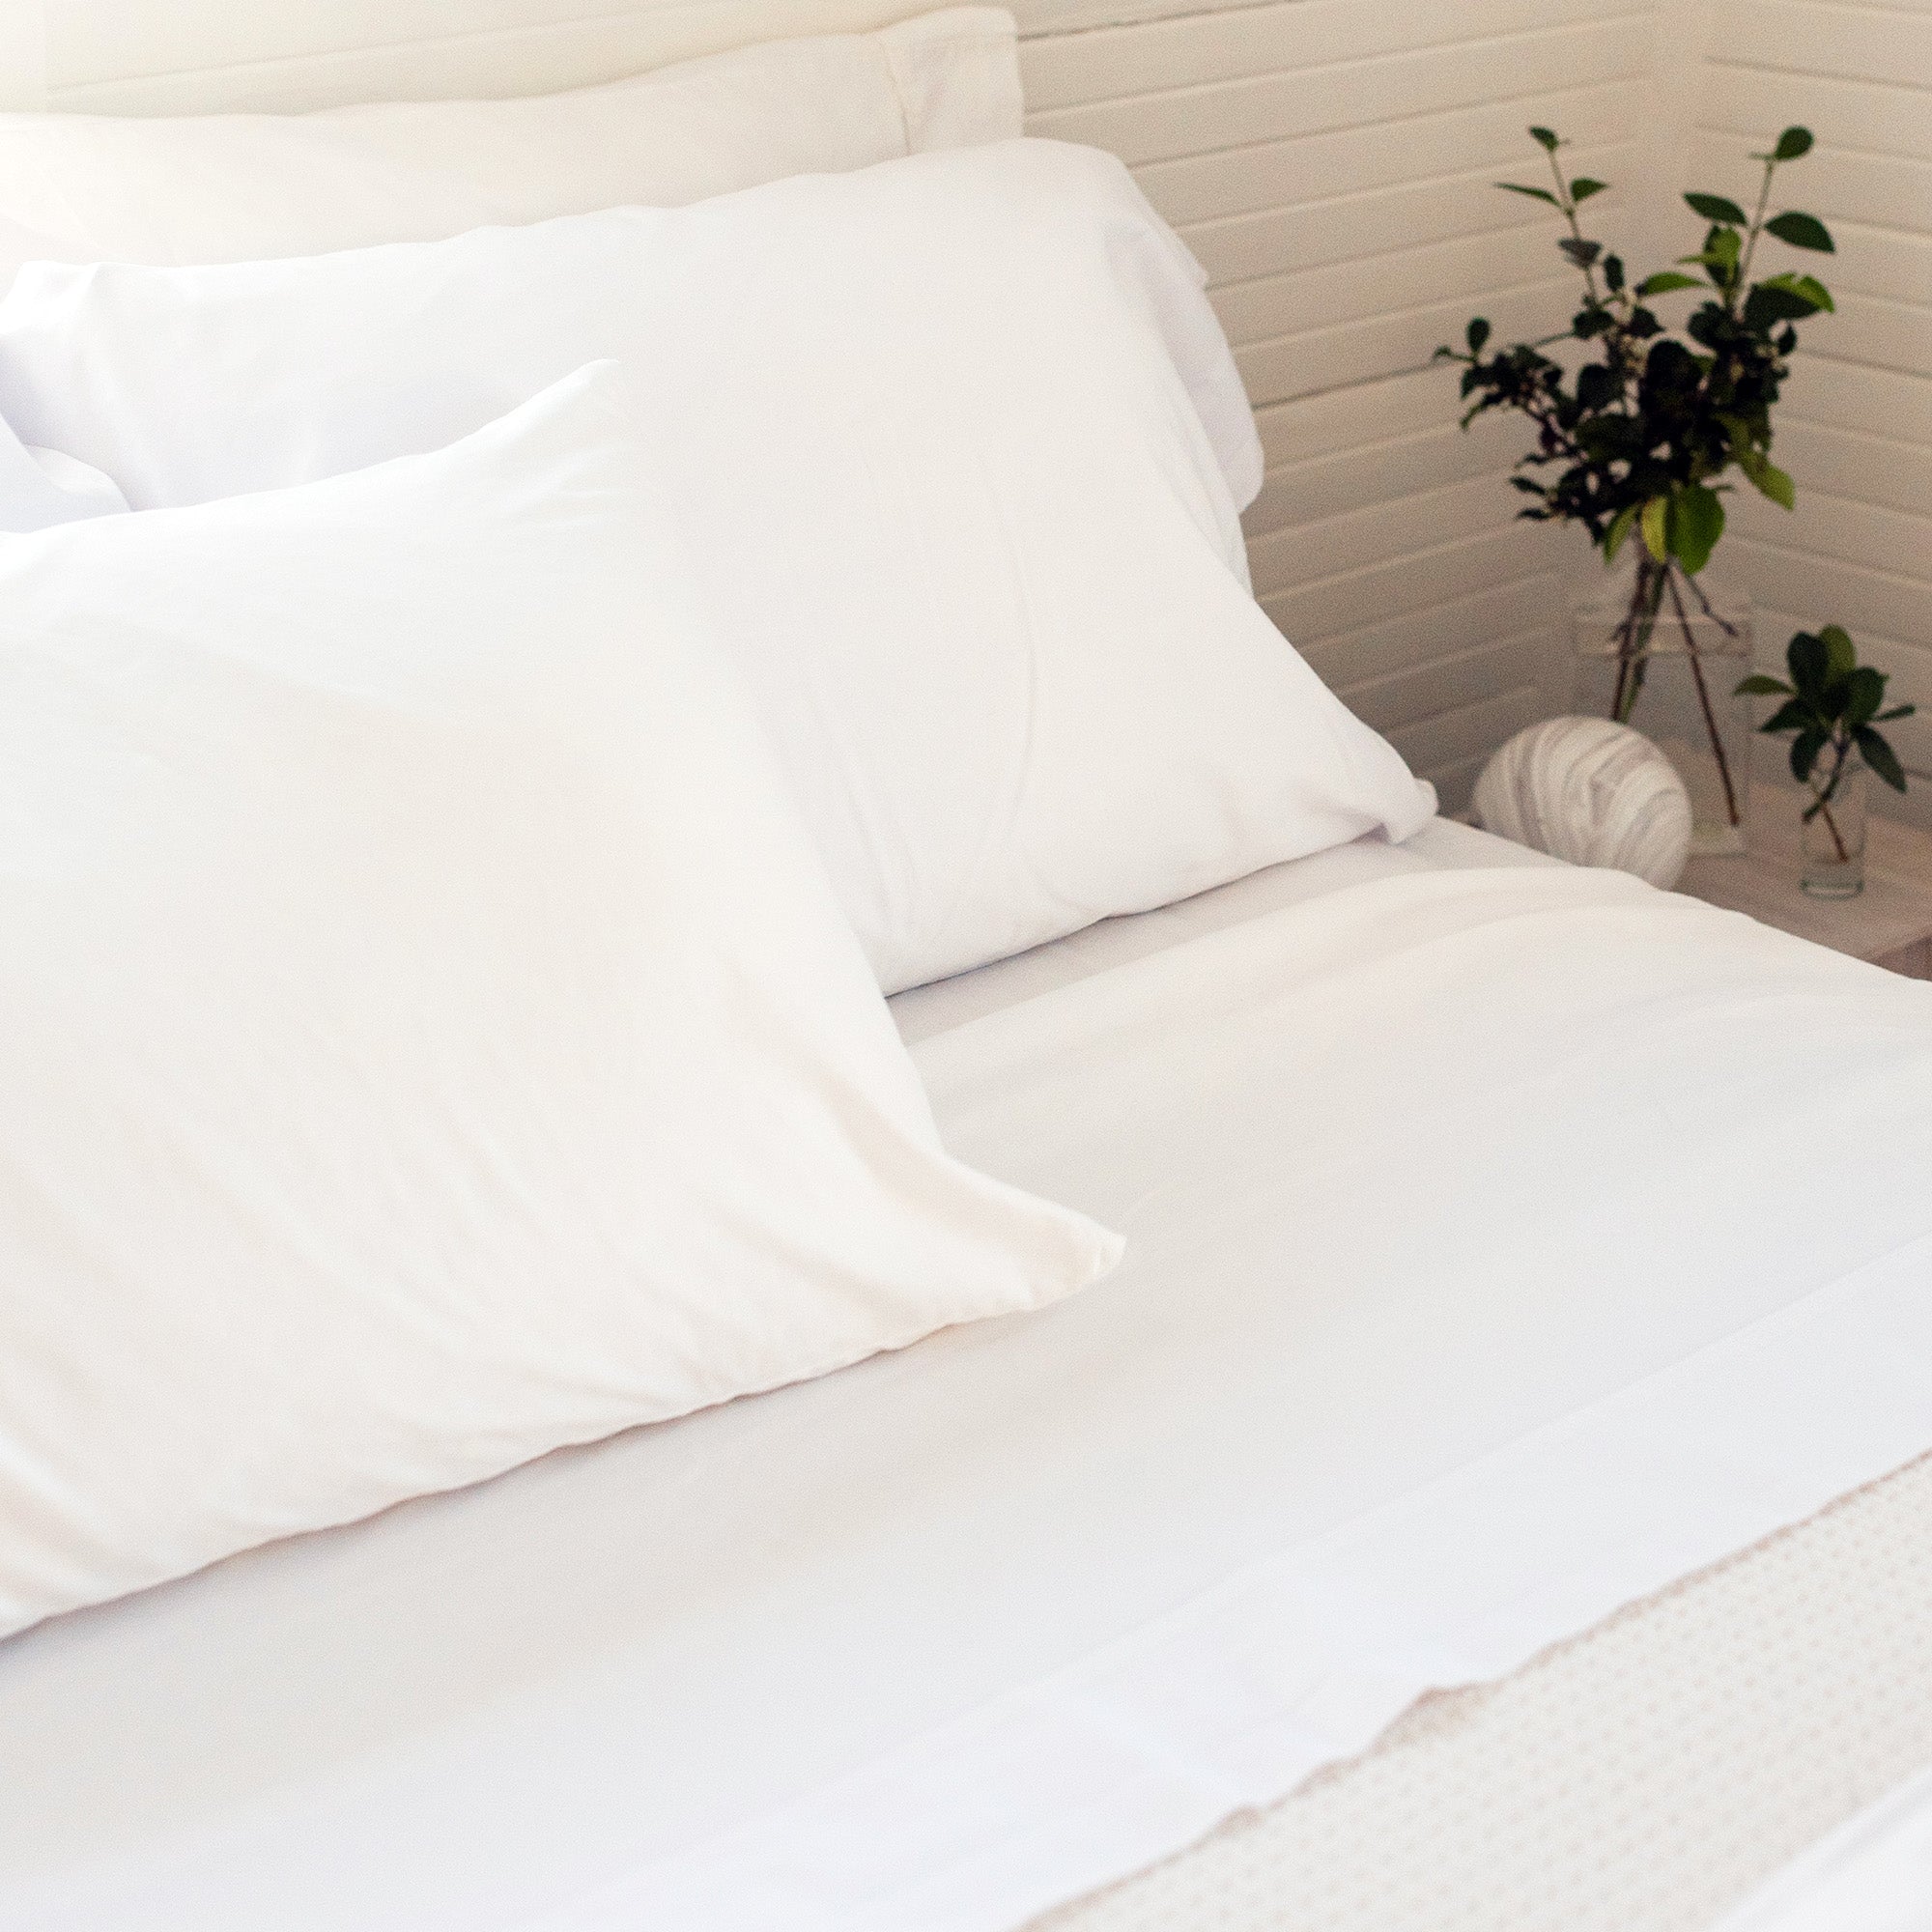 How to Size Blankets for Your Bed - American Blanket Company